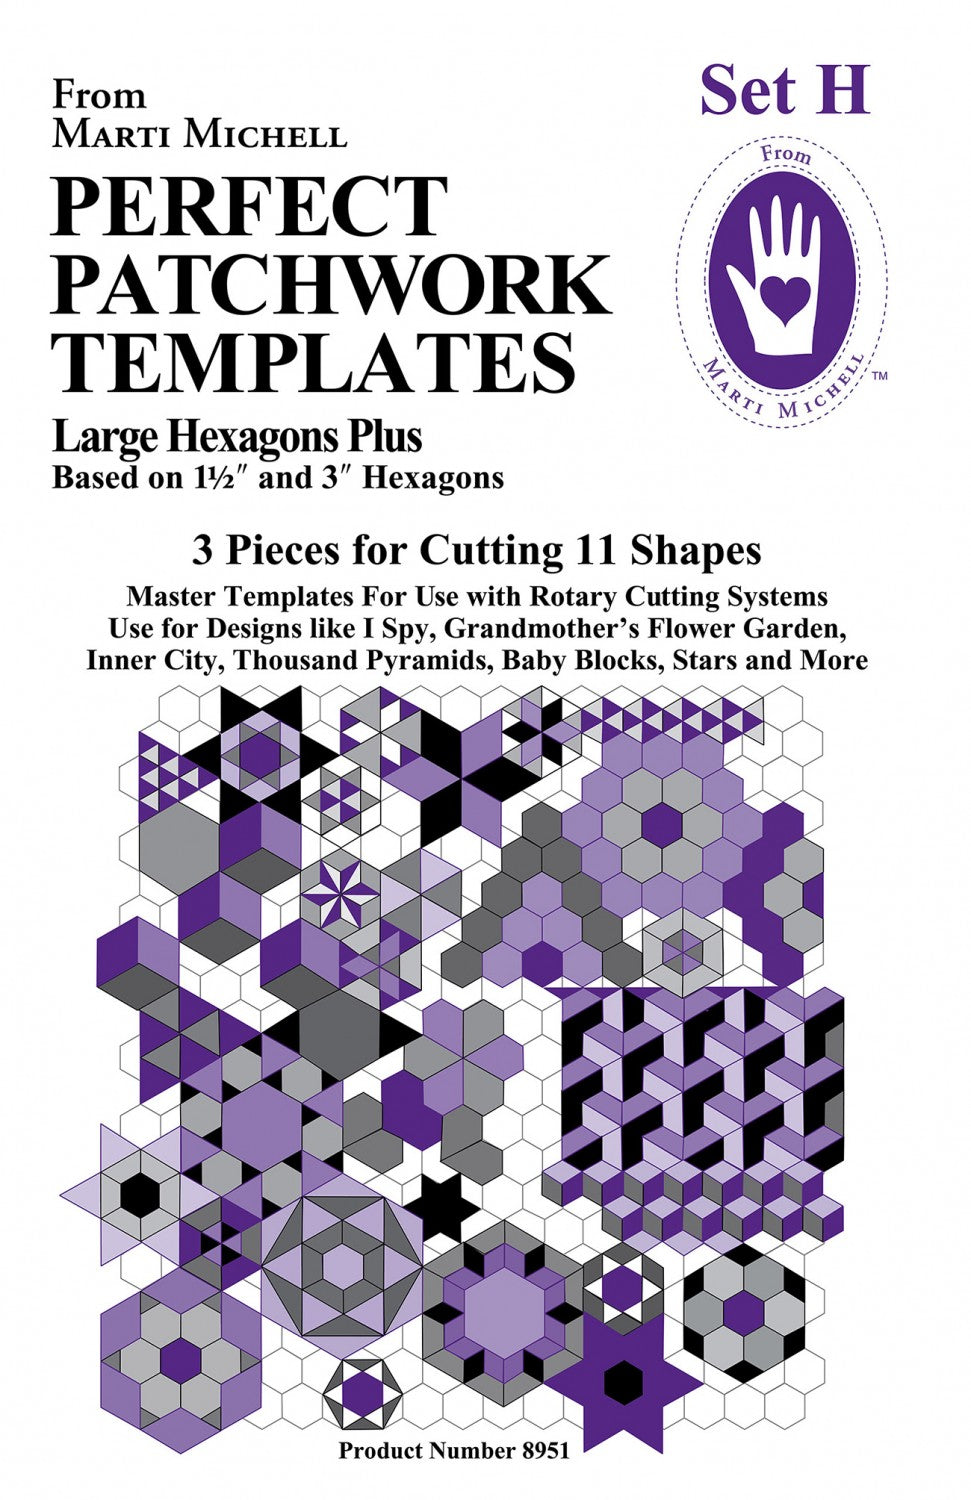 Set H - Perfect Patchwork Templates - Marti Michell